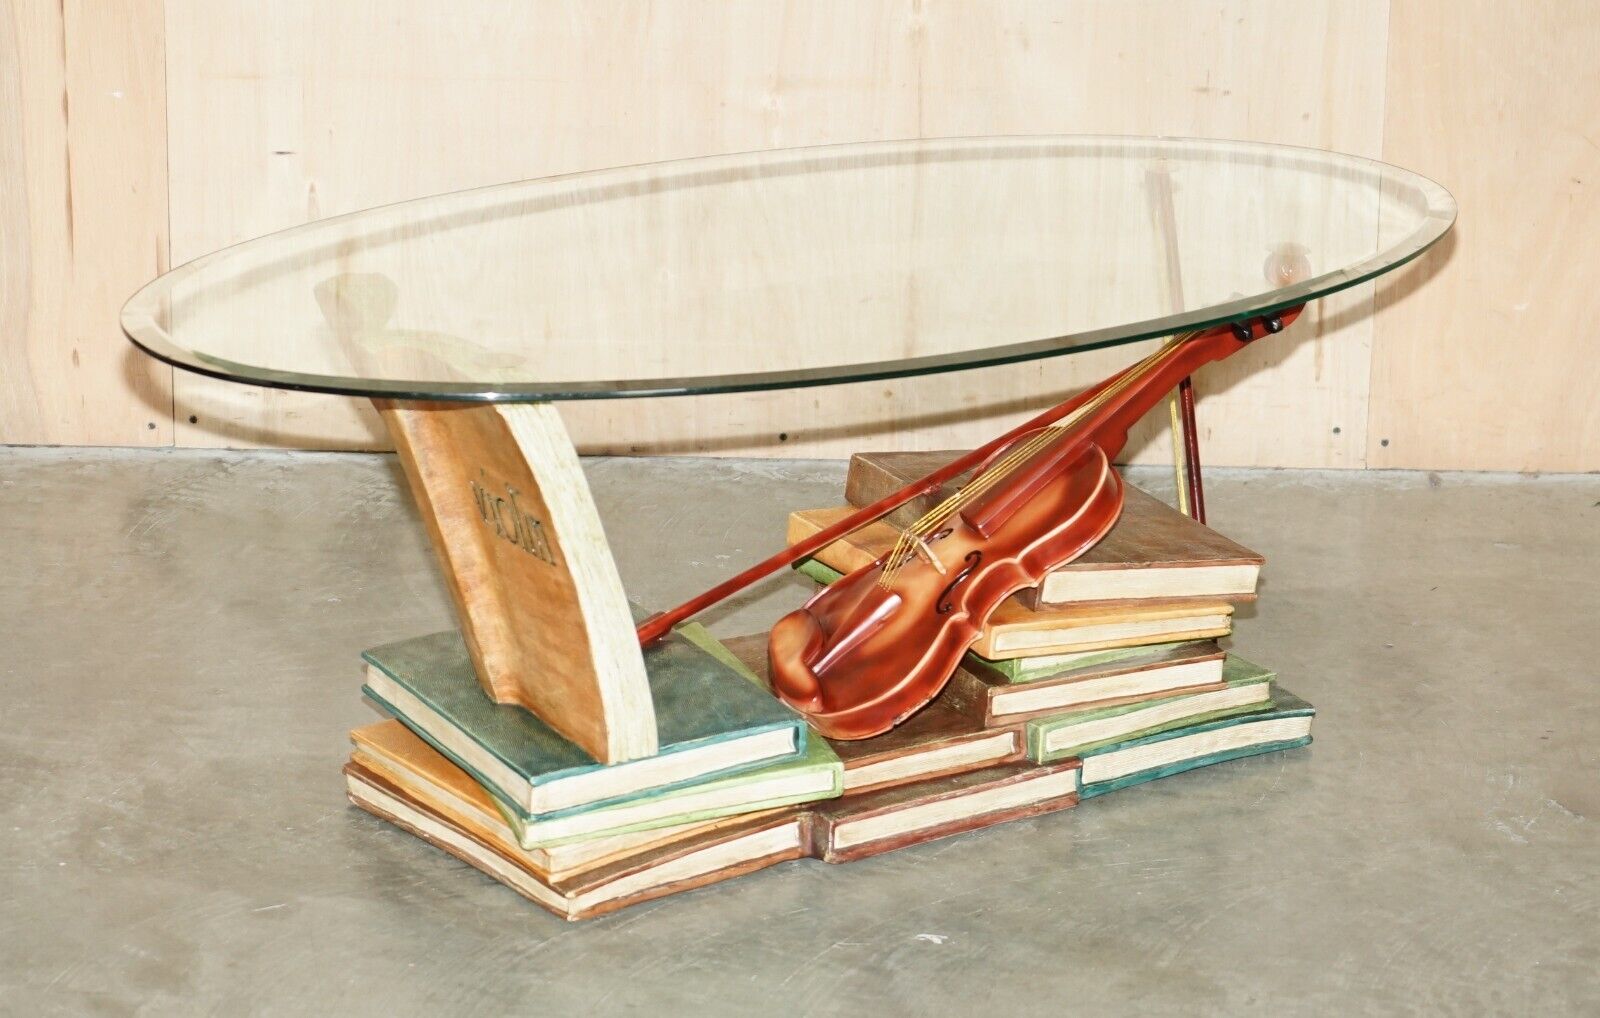 SUPER DECORATIVE MOZART STACKED BOOKS & VIOLIN COFFEE TABLE WITH GLASS OVAL TOP